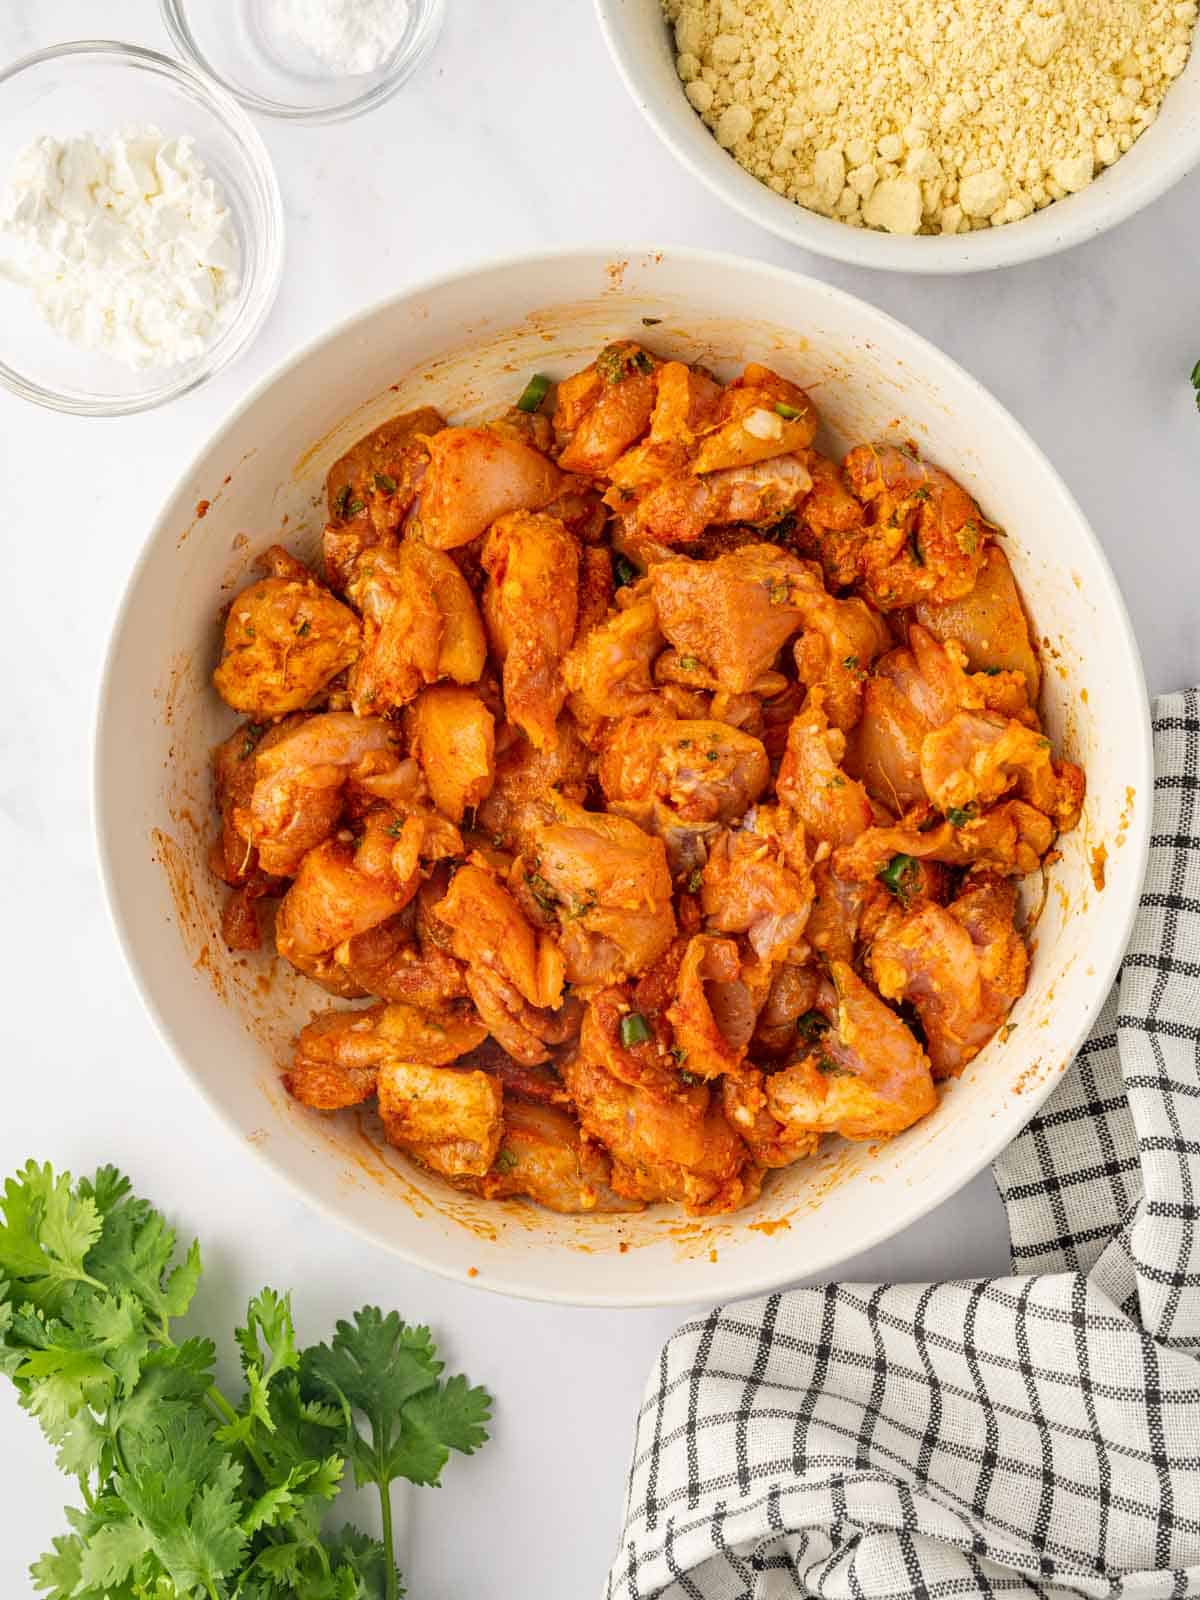 Chicken is marinated in a spicy seasoning blend in a bowl.